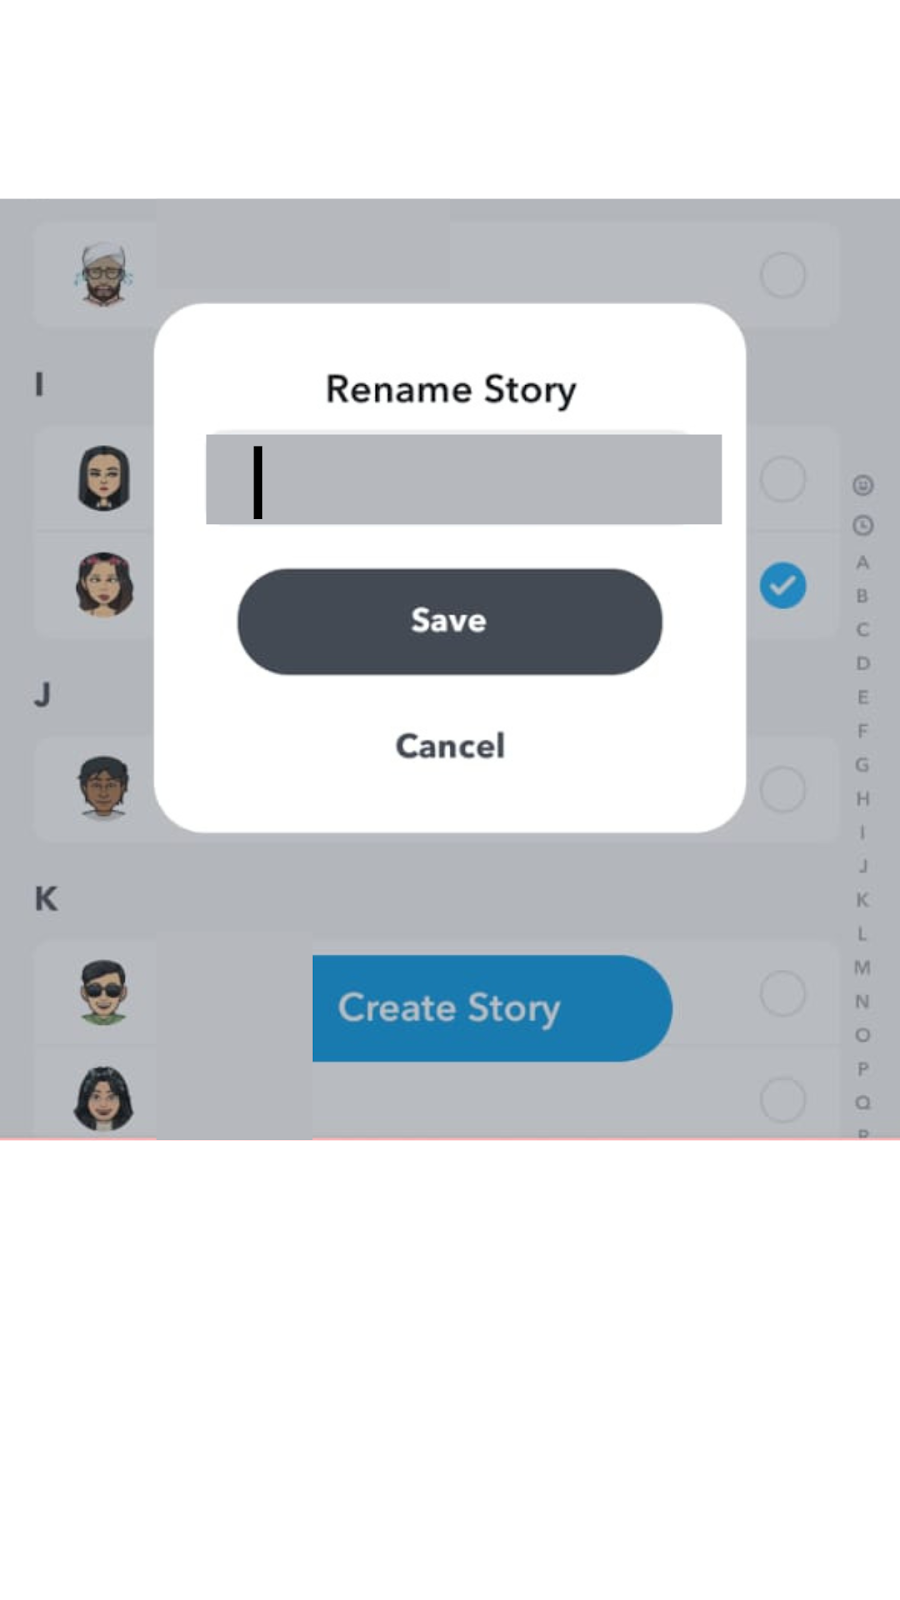 How to rename a Story on Snapchat?